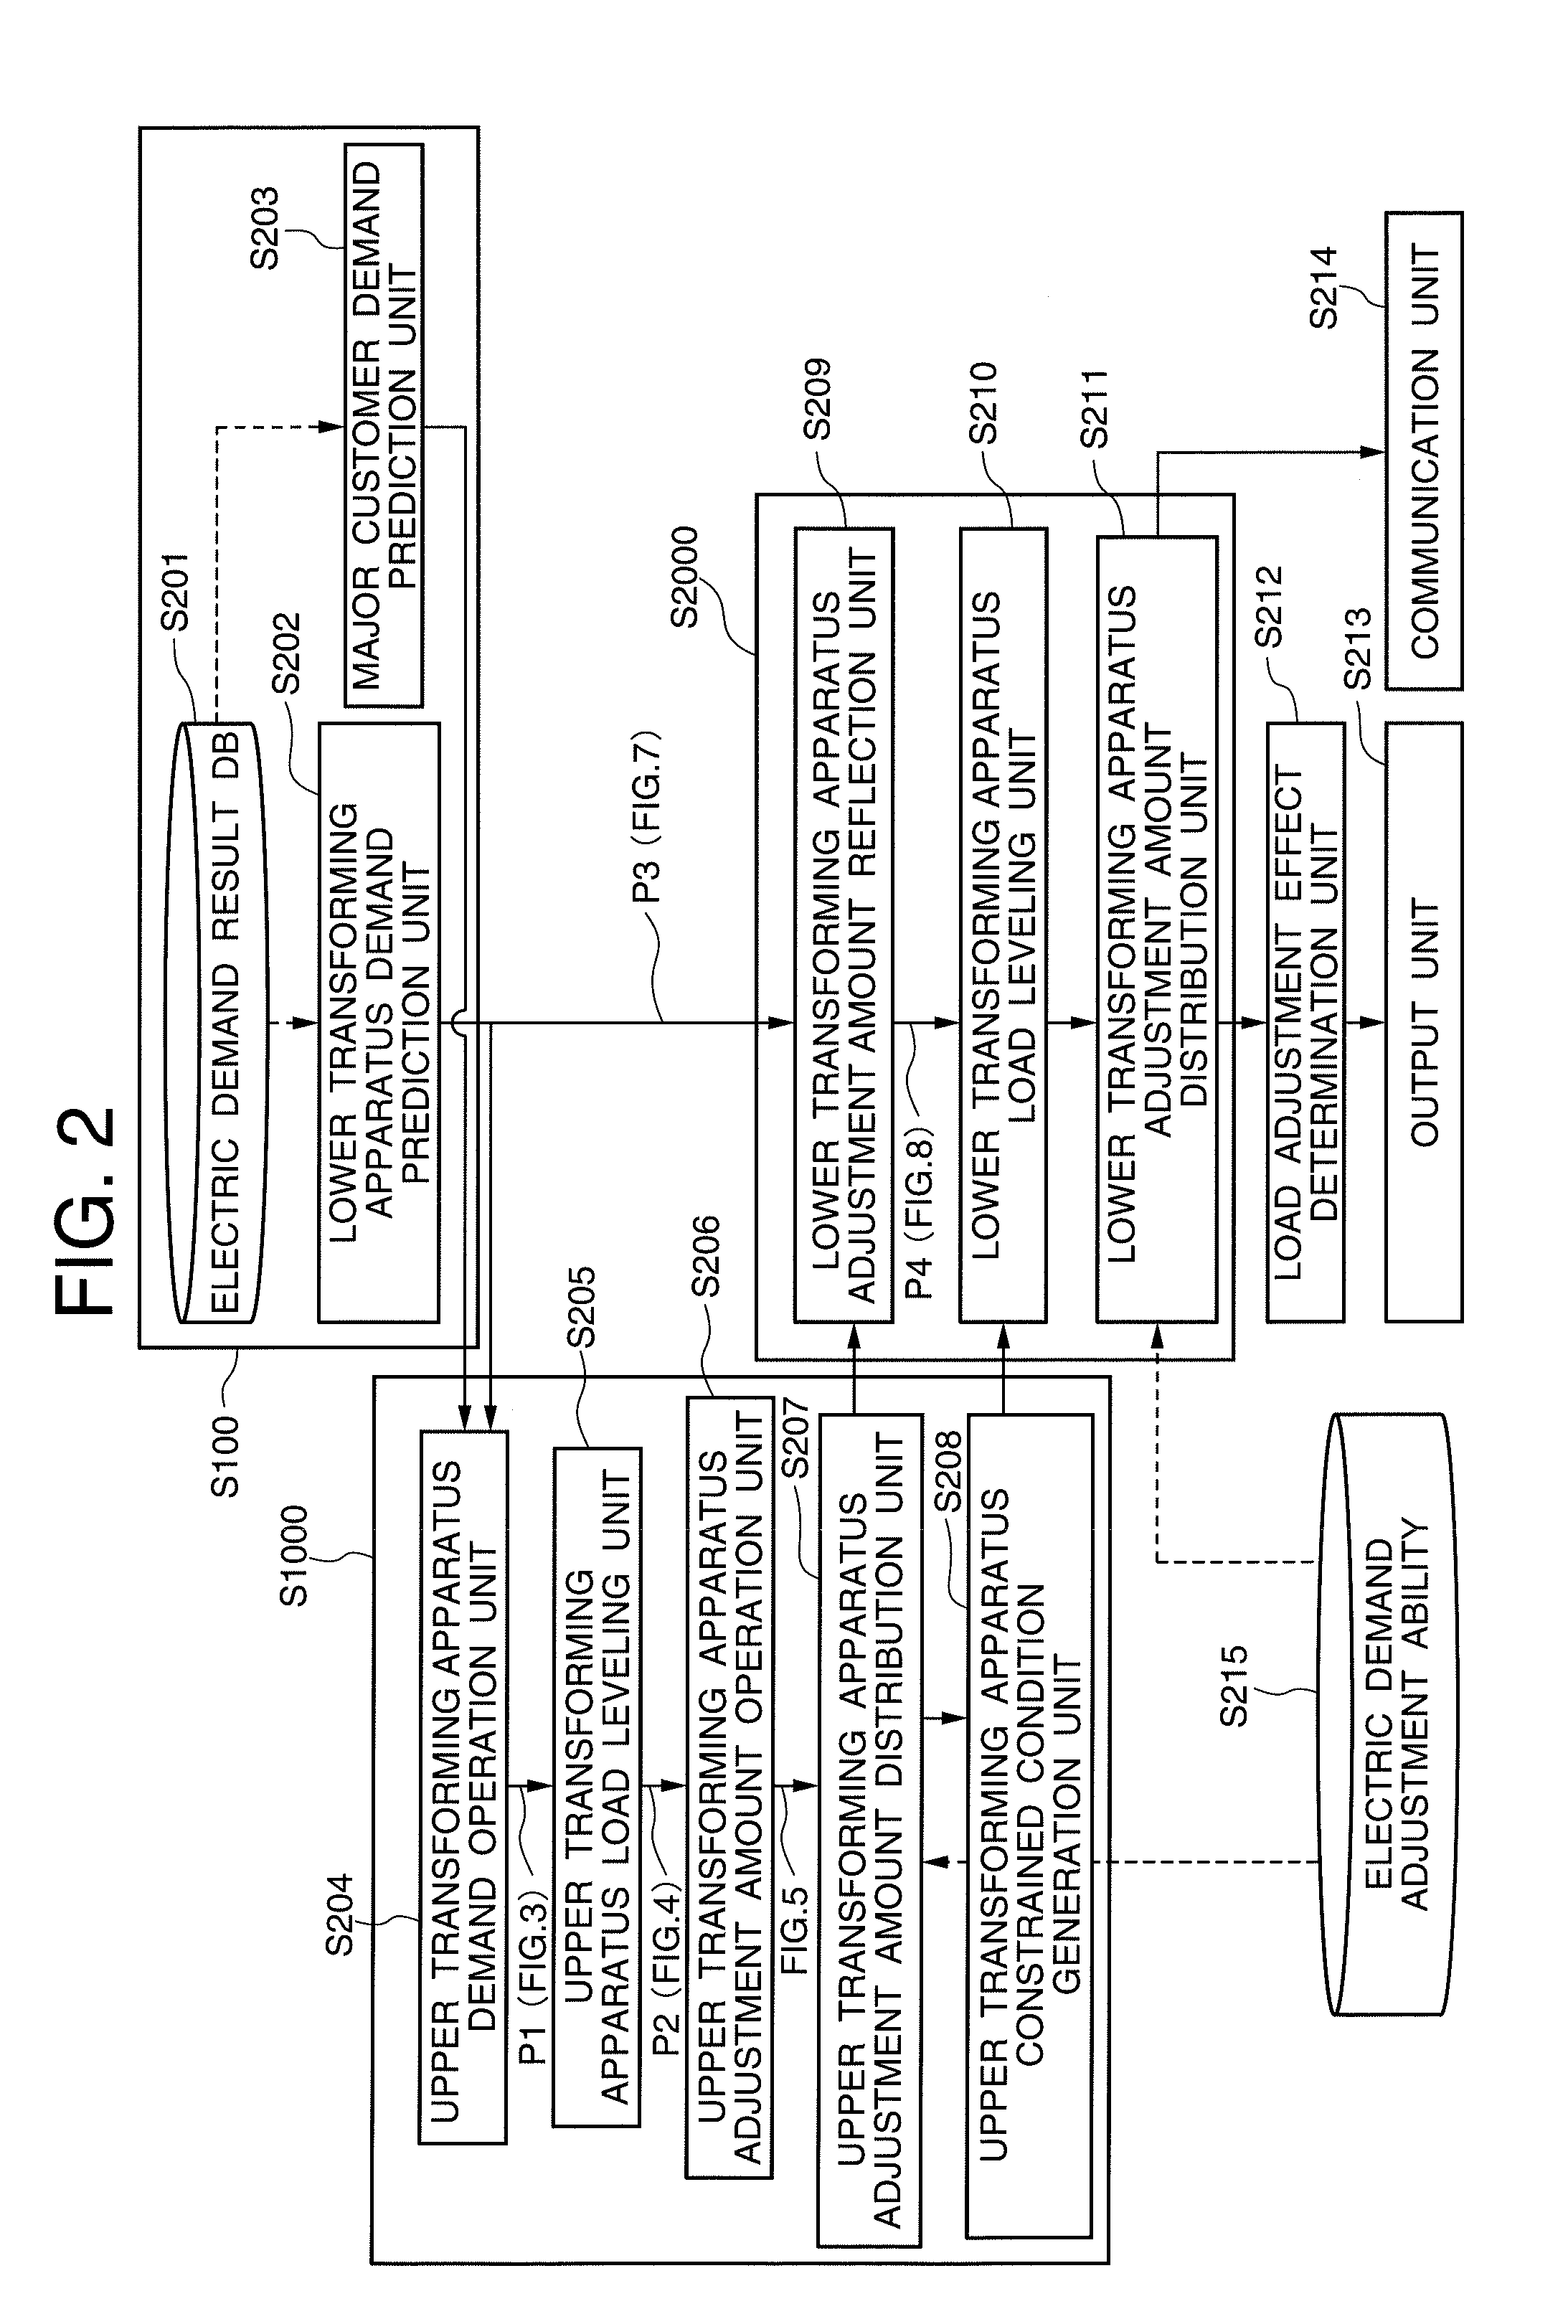 Load Leveling System of Power System